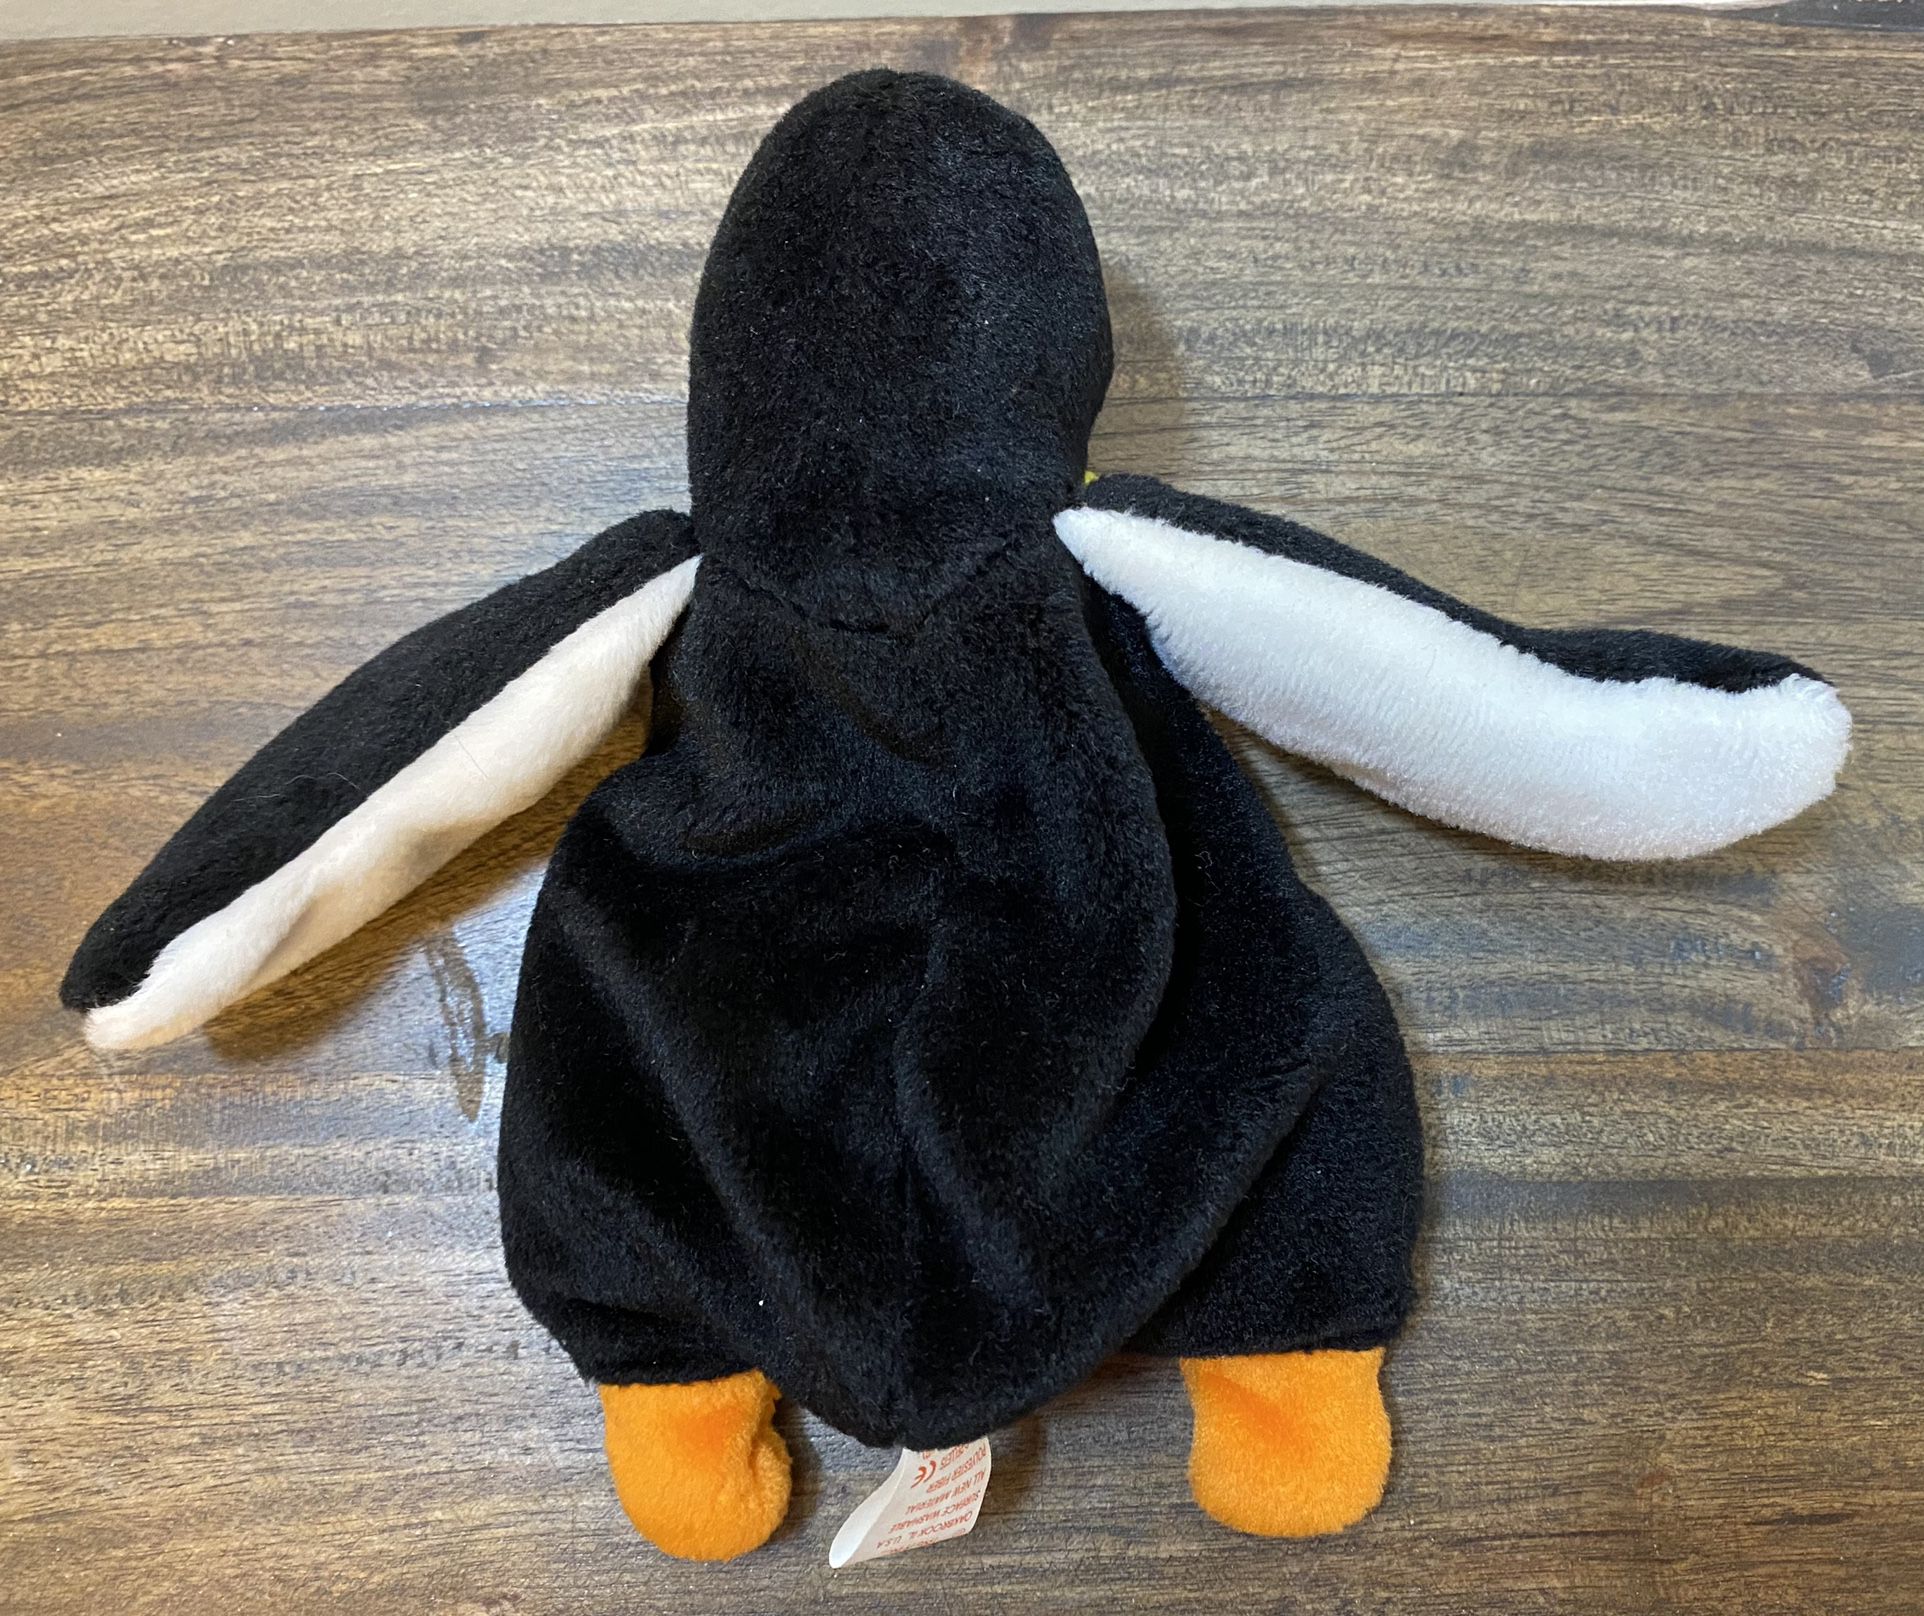 TY Beanie babies Penguin Waddle approximately 7” Tall